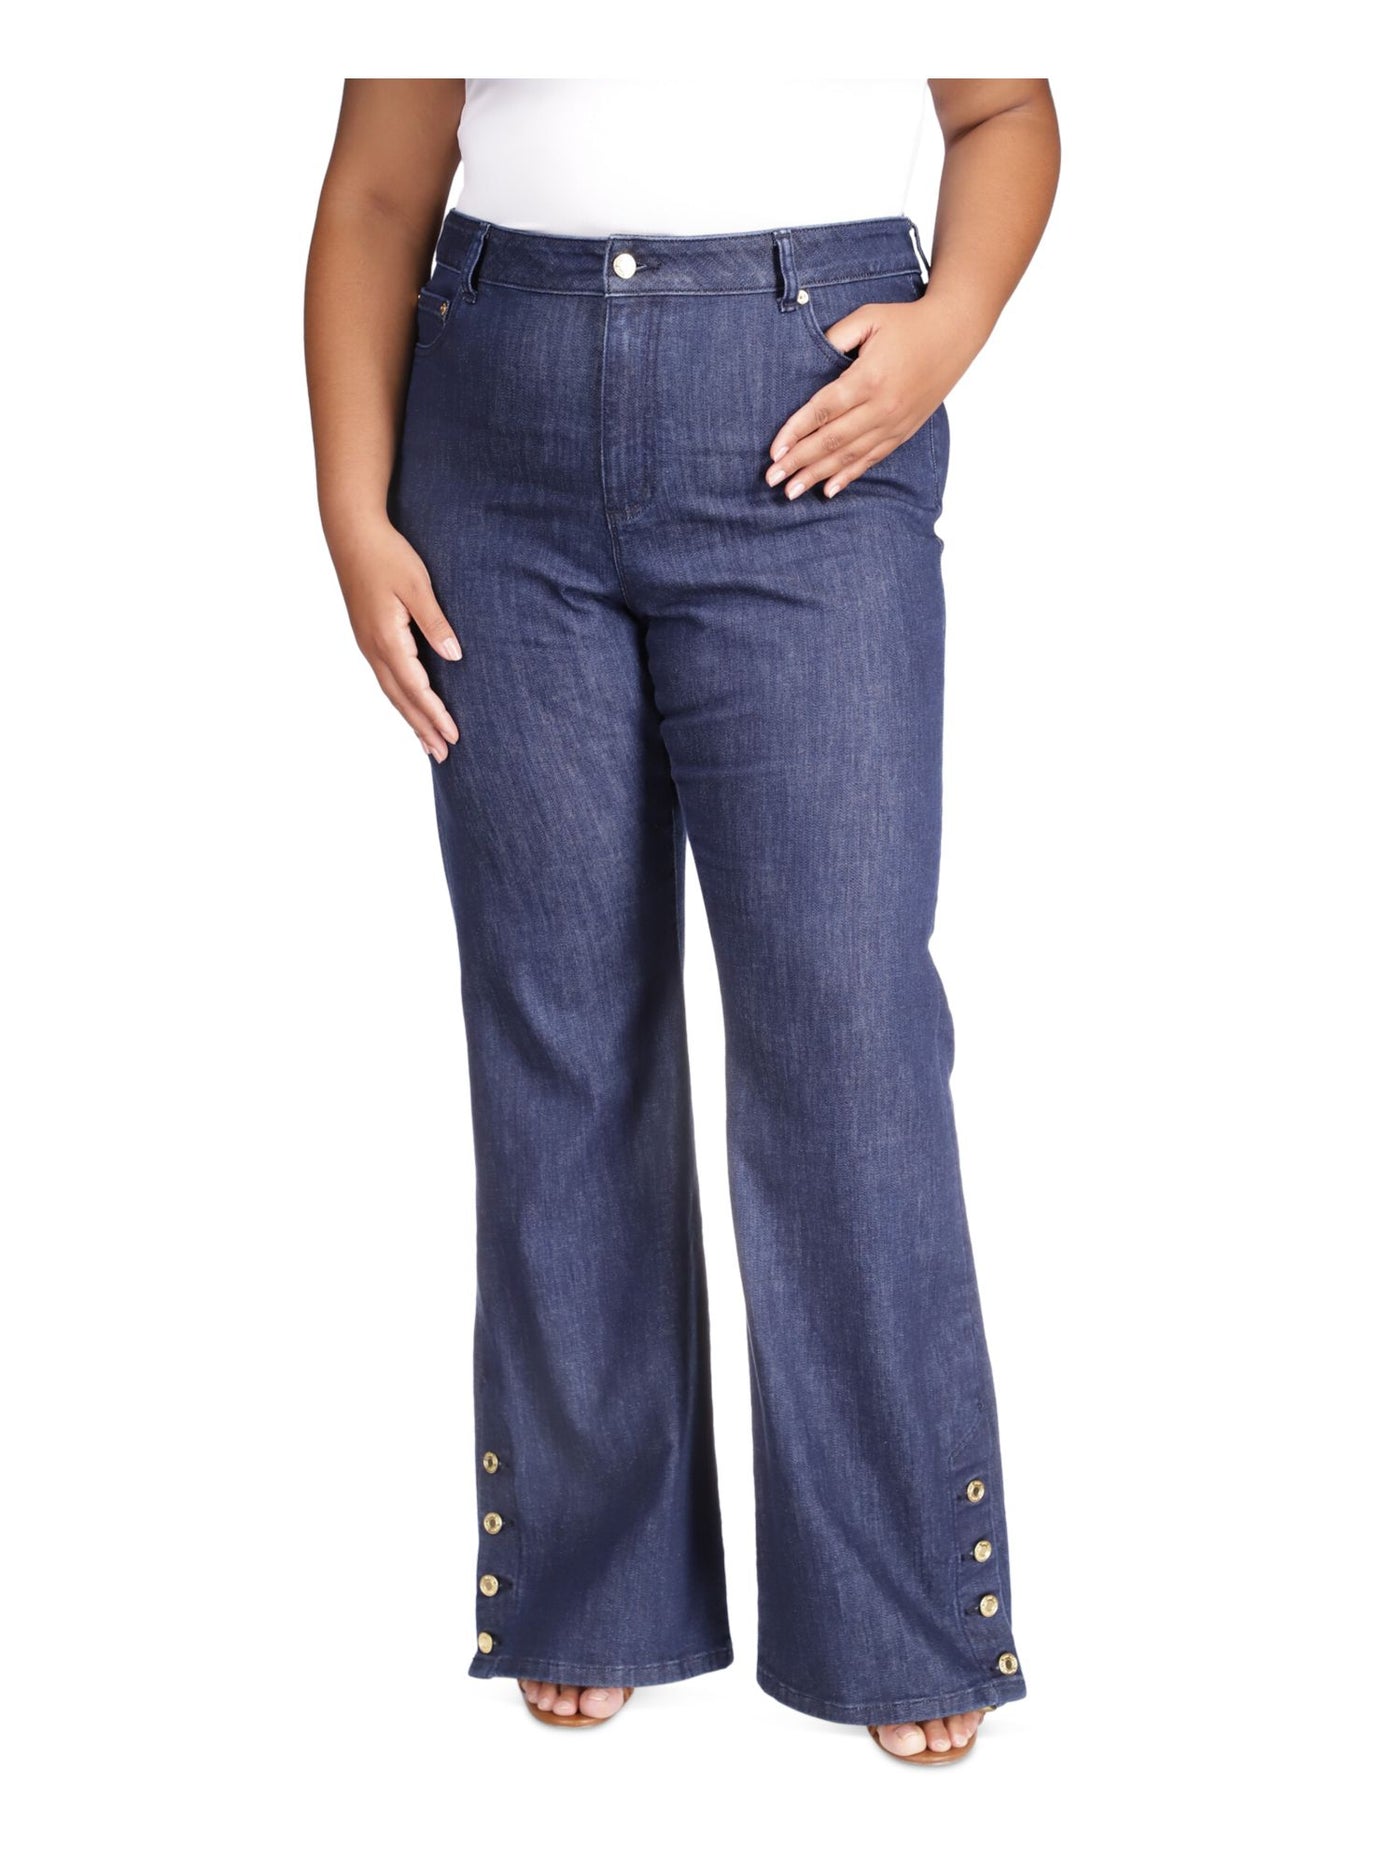 MICHAEL KORS Womens Navy Pocketed Zippered Flare Jeans Plus 14W